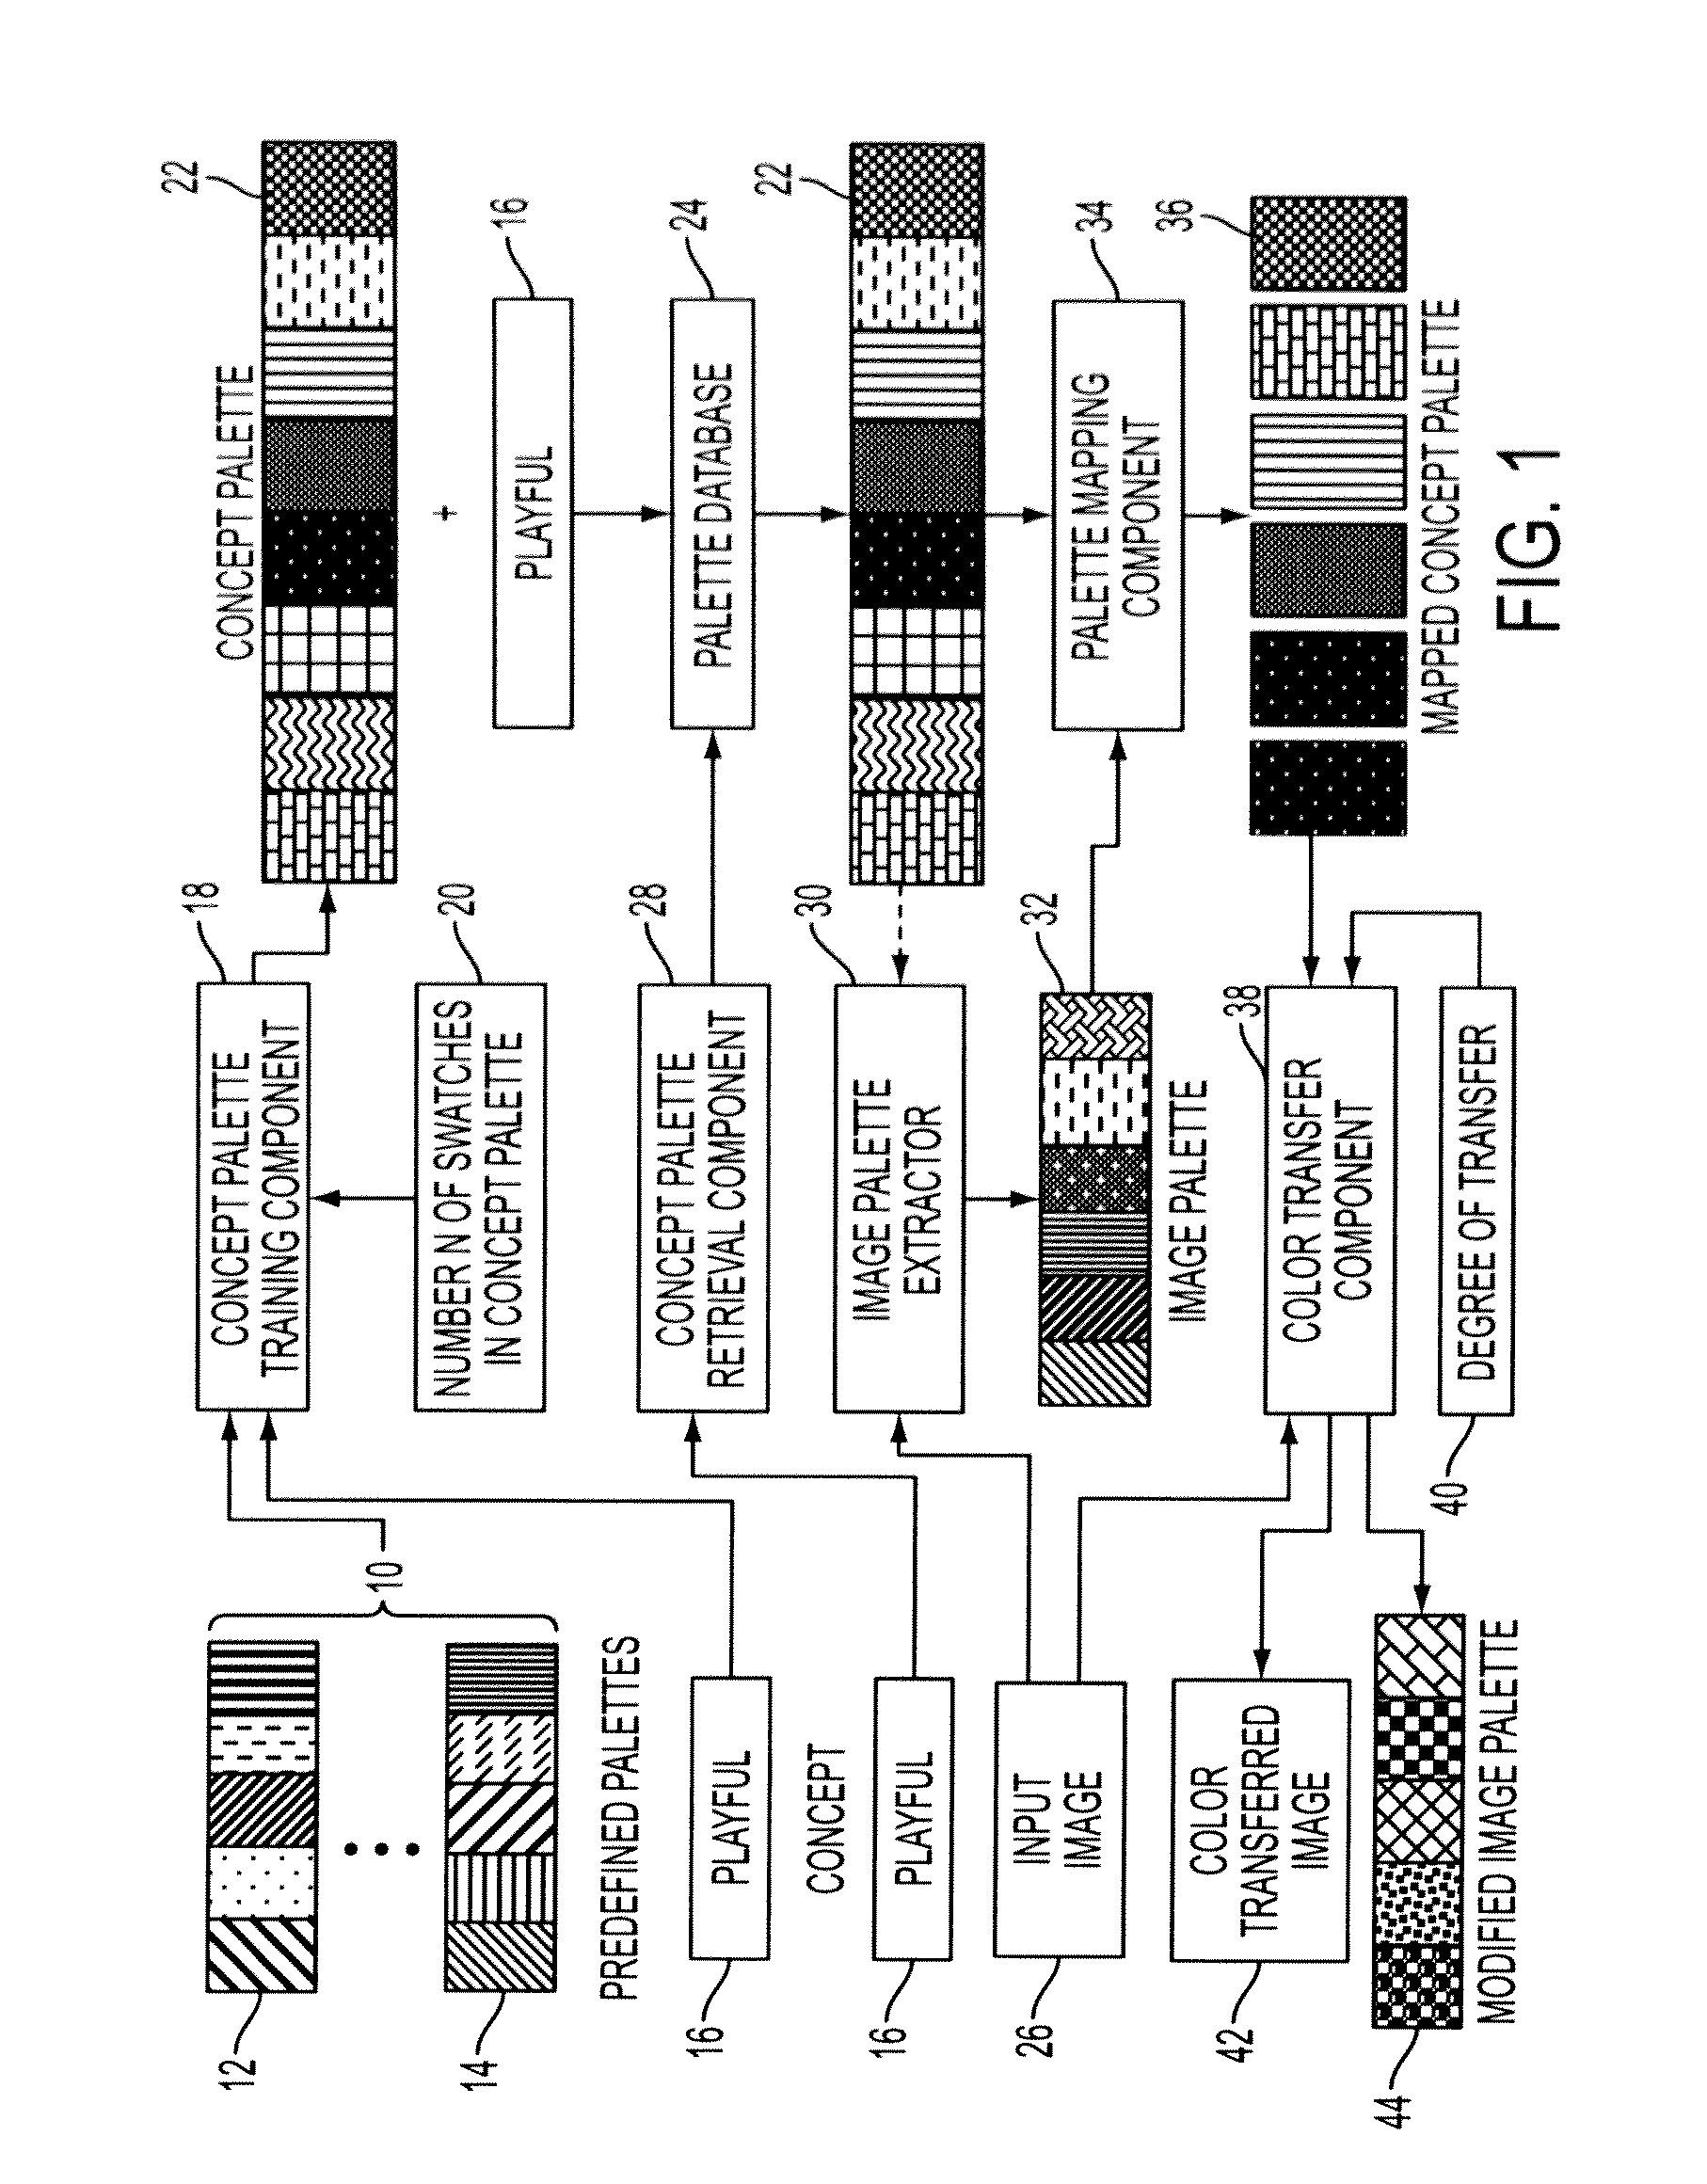 System and method for image color transfer based on target concepts